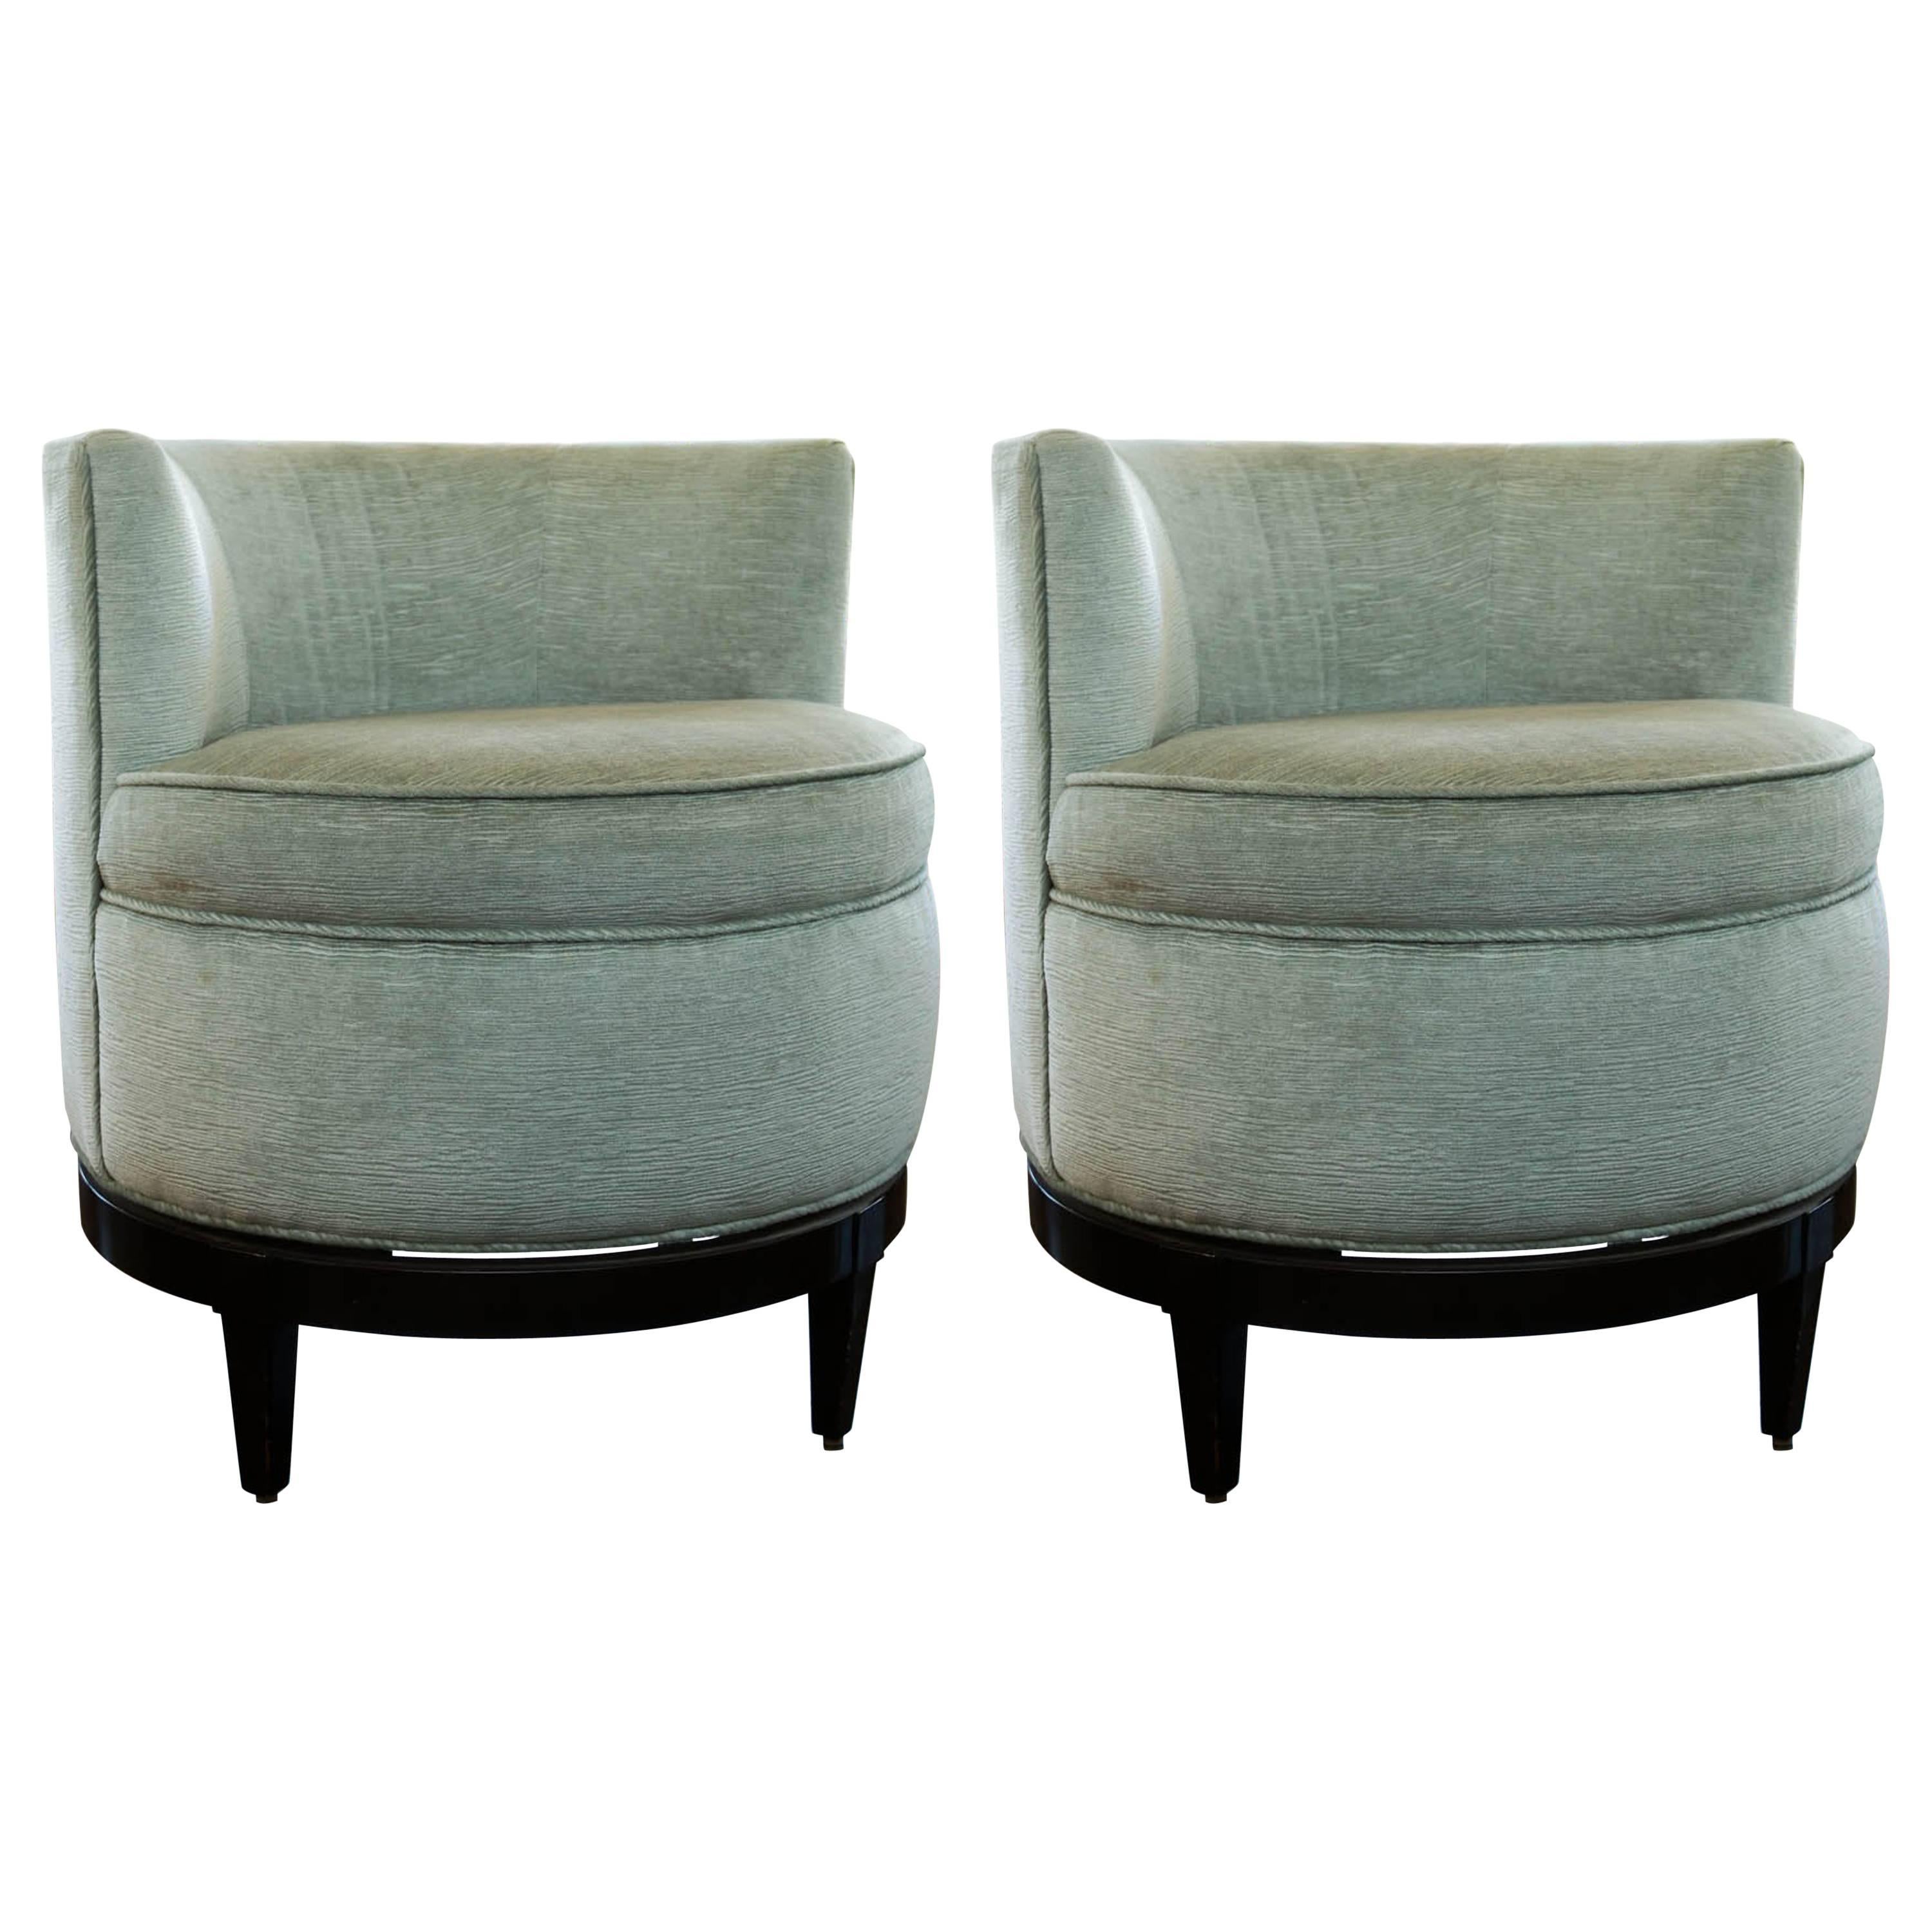 Pair of Swaim Barrel Back Swivel Chairs For Sale